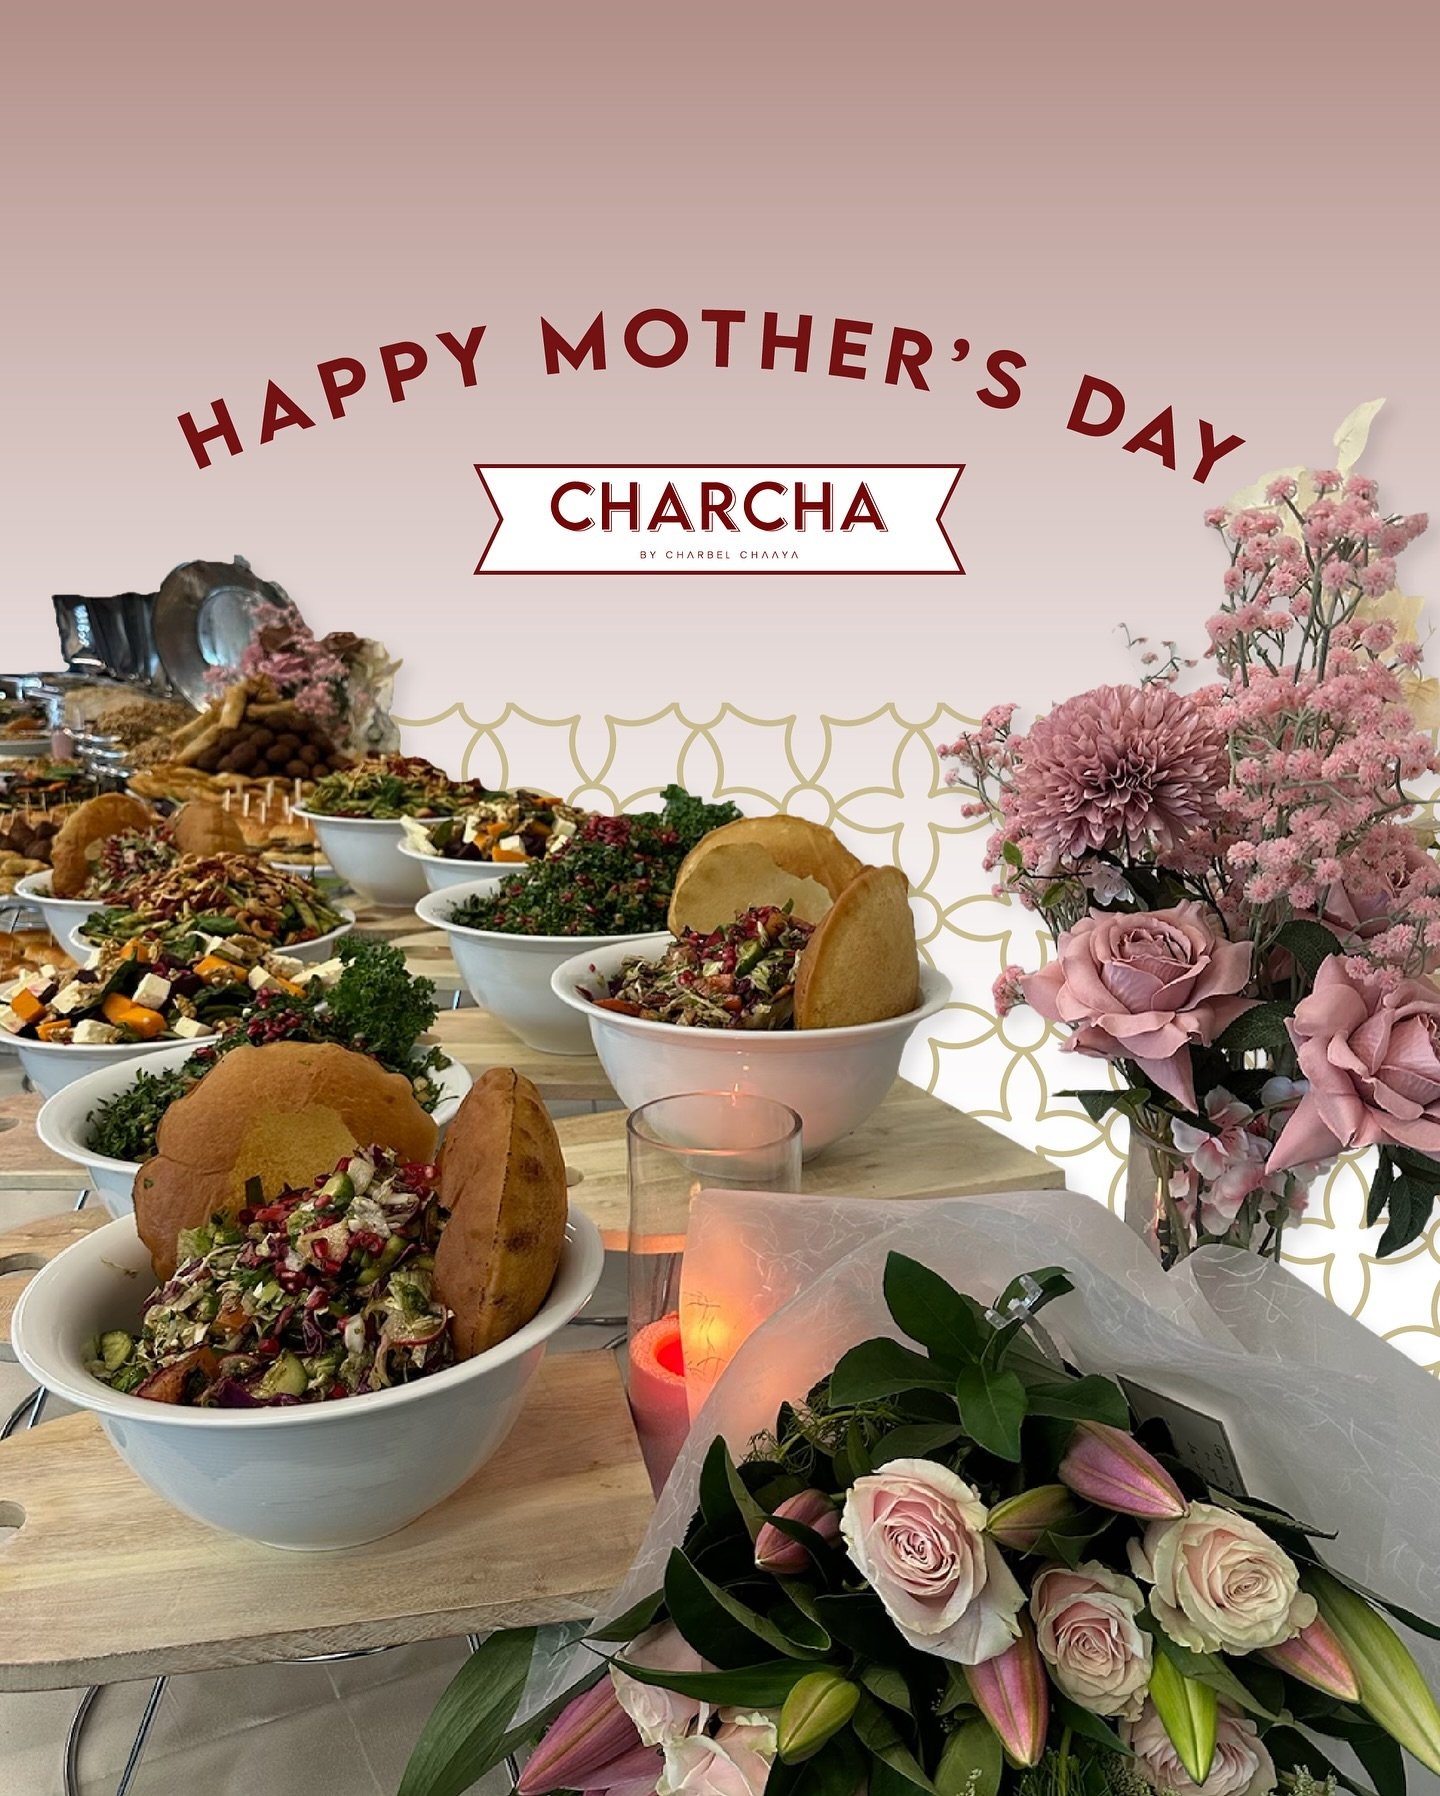 From our hardworking staff to our wonderful customers, mums are the heart of our community. 💐 Happy Mother&rsquo;s Day from all of us at CHAR CHA 💖

#mothersday #happymothersday #lebanesecuisine #catering #sydneyfood